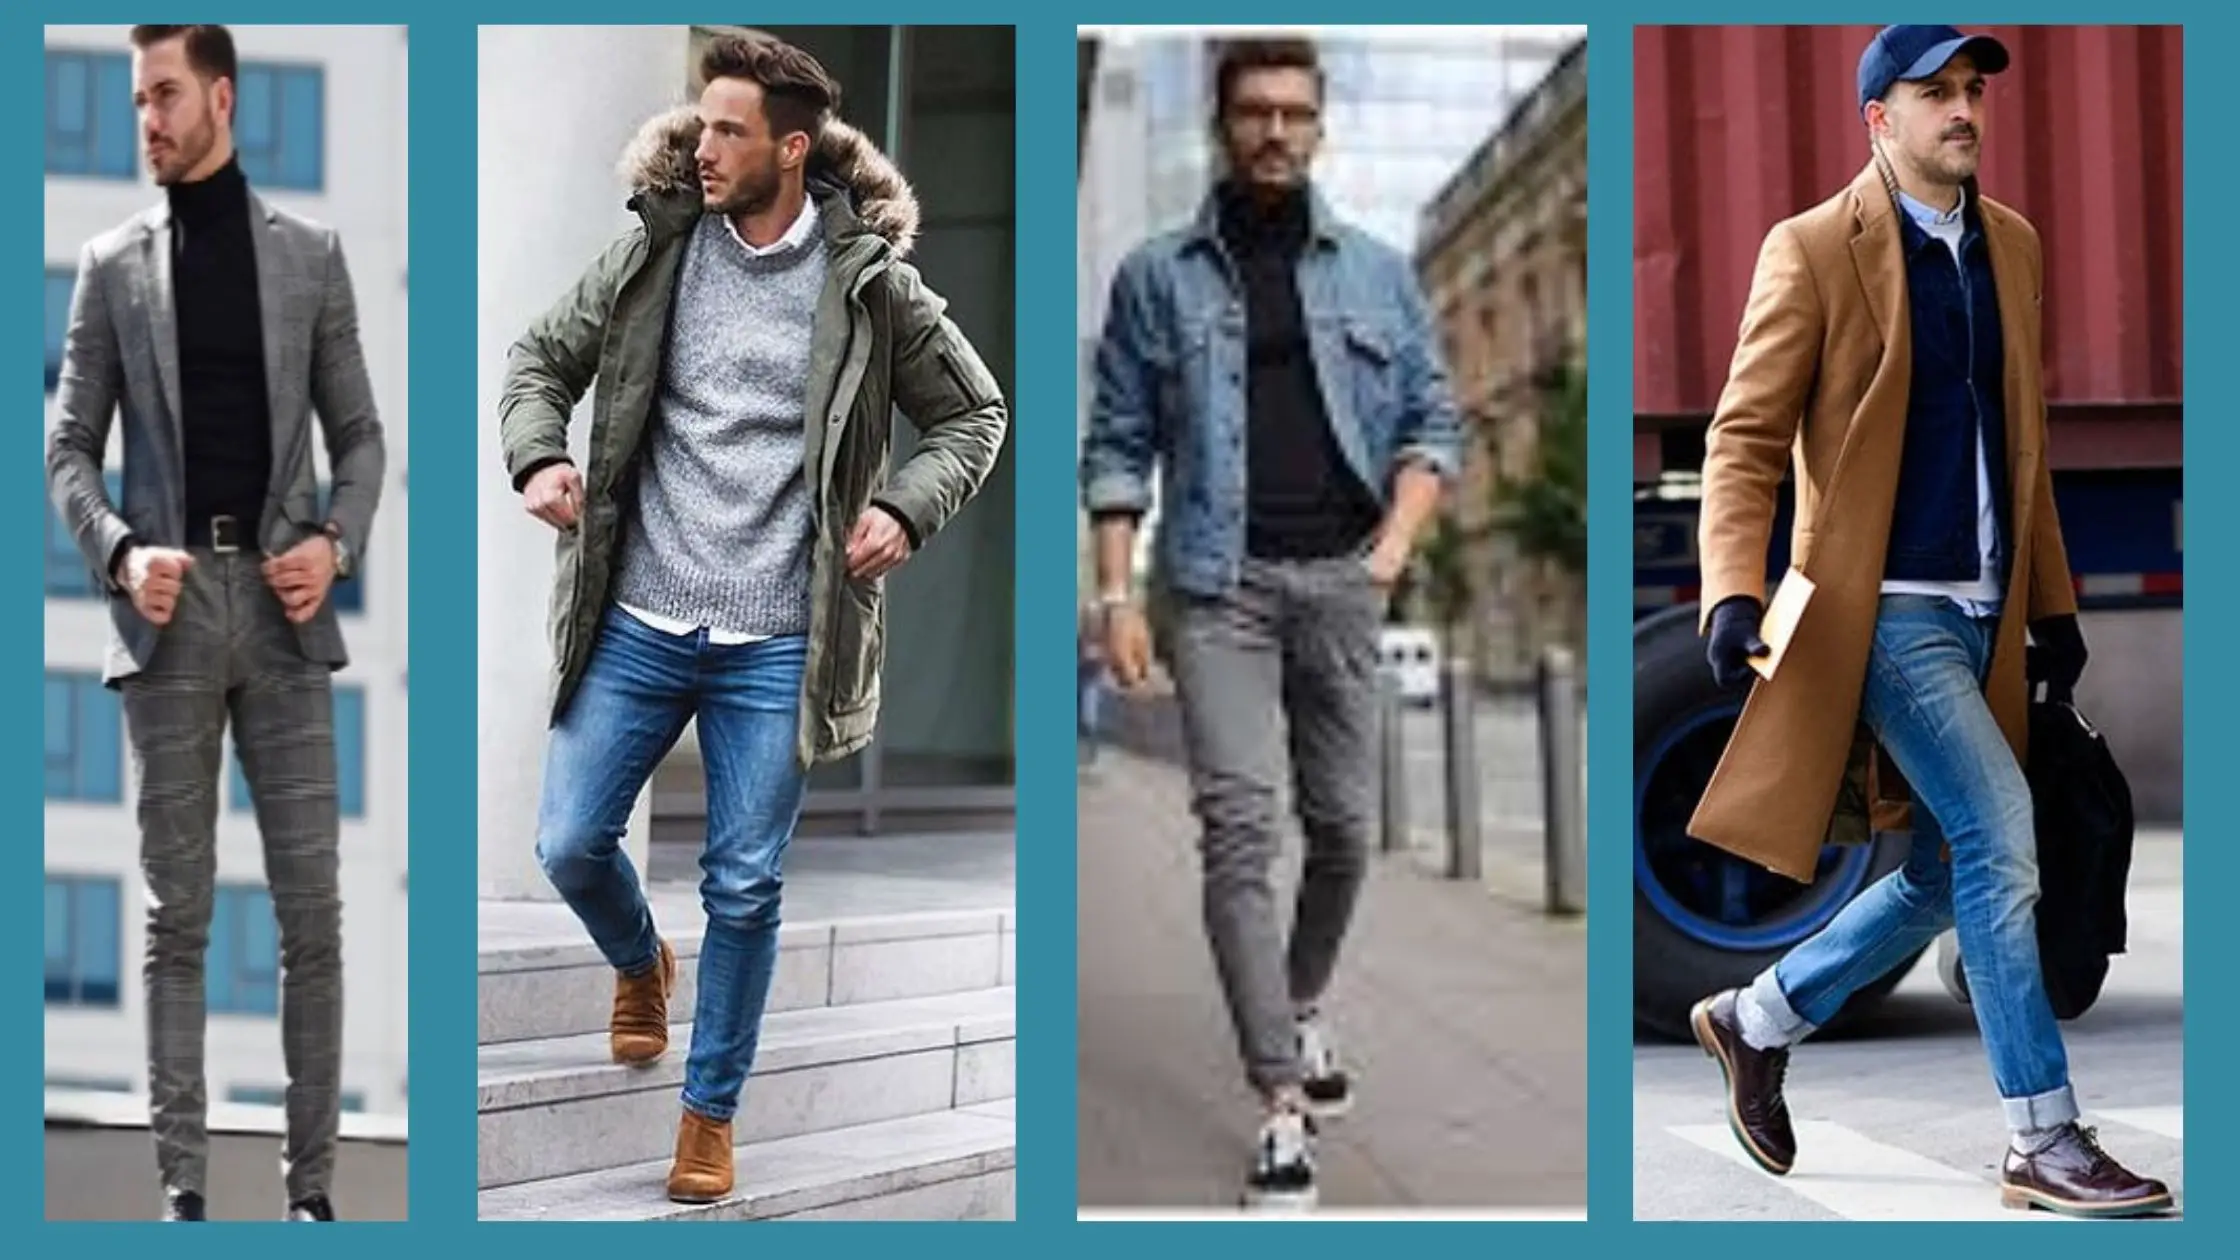 Winter Clothes for Men: 8 Outfit Ideas to Rock the Season - Fashion Drips